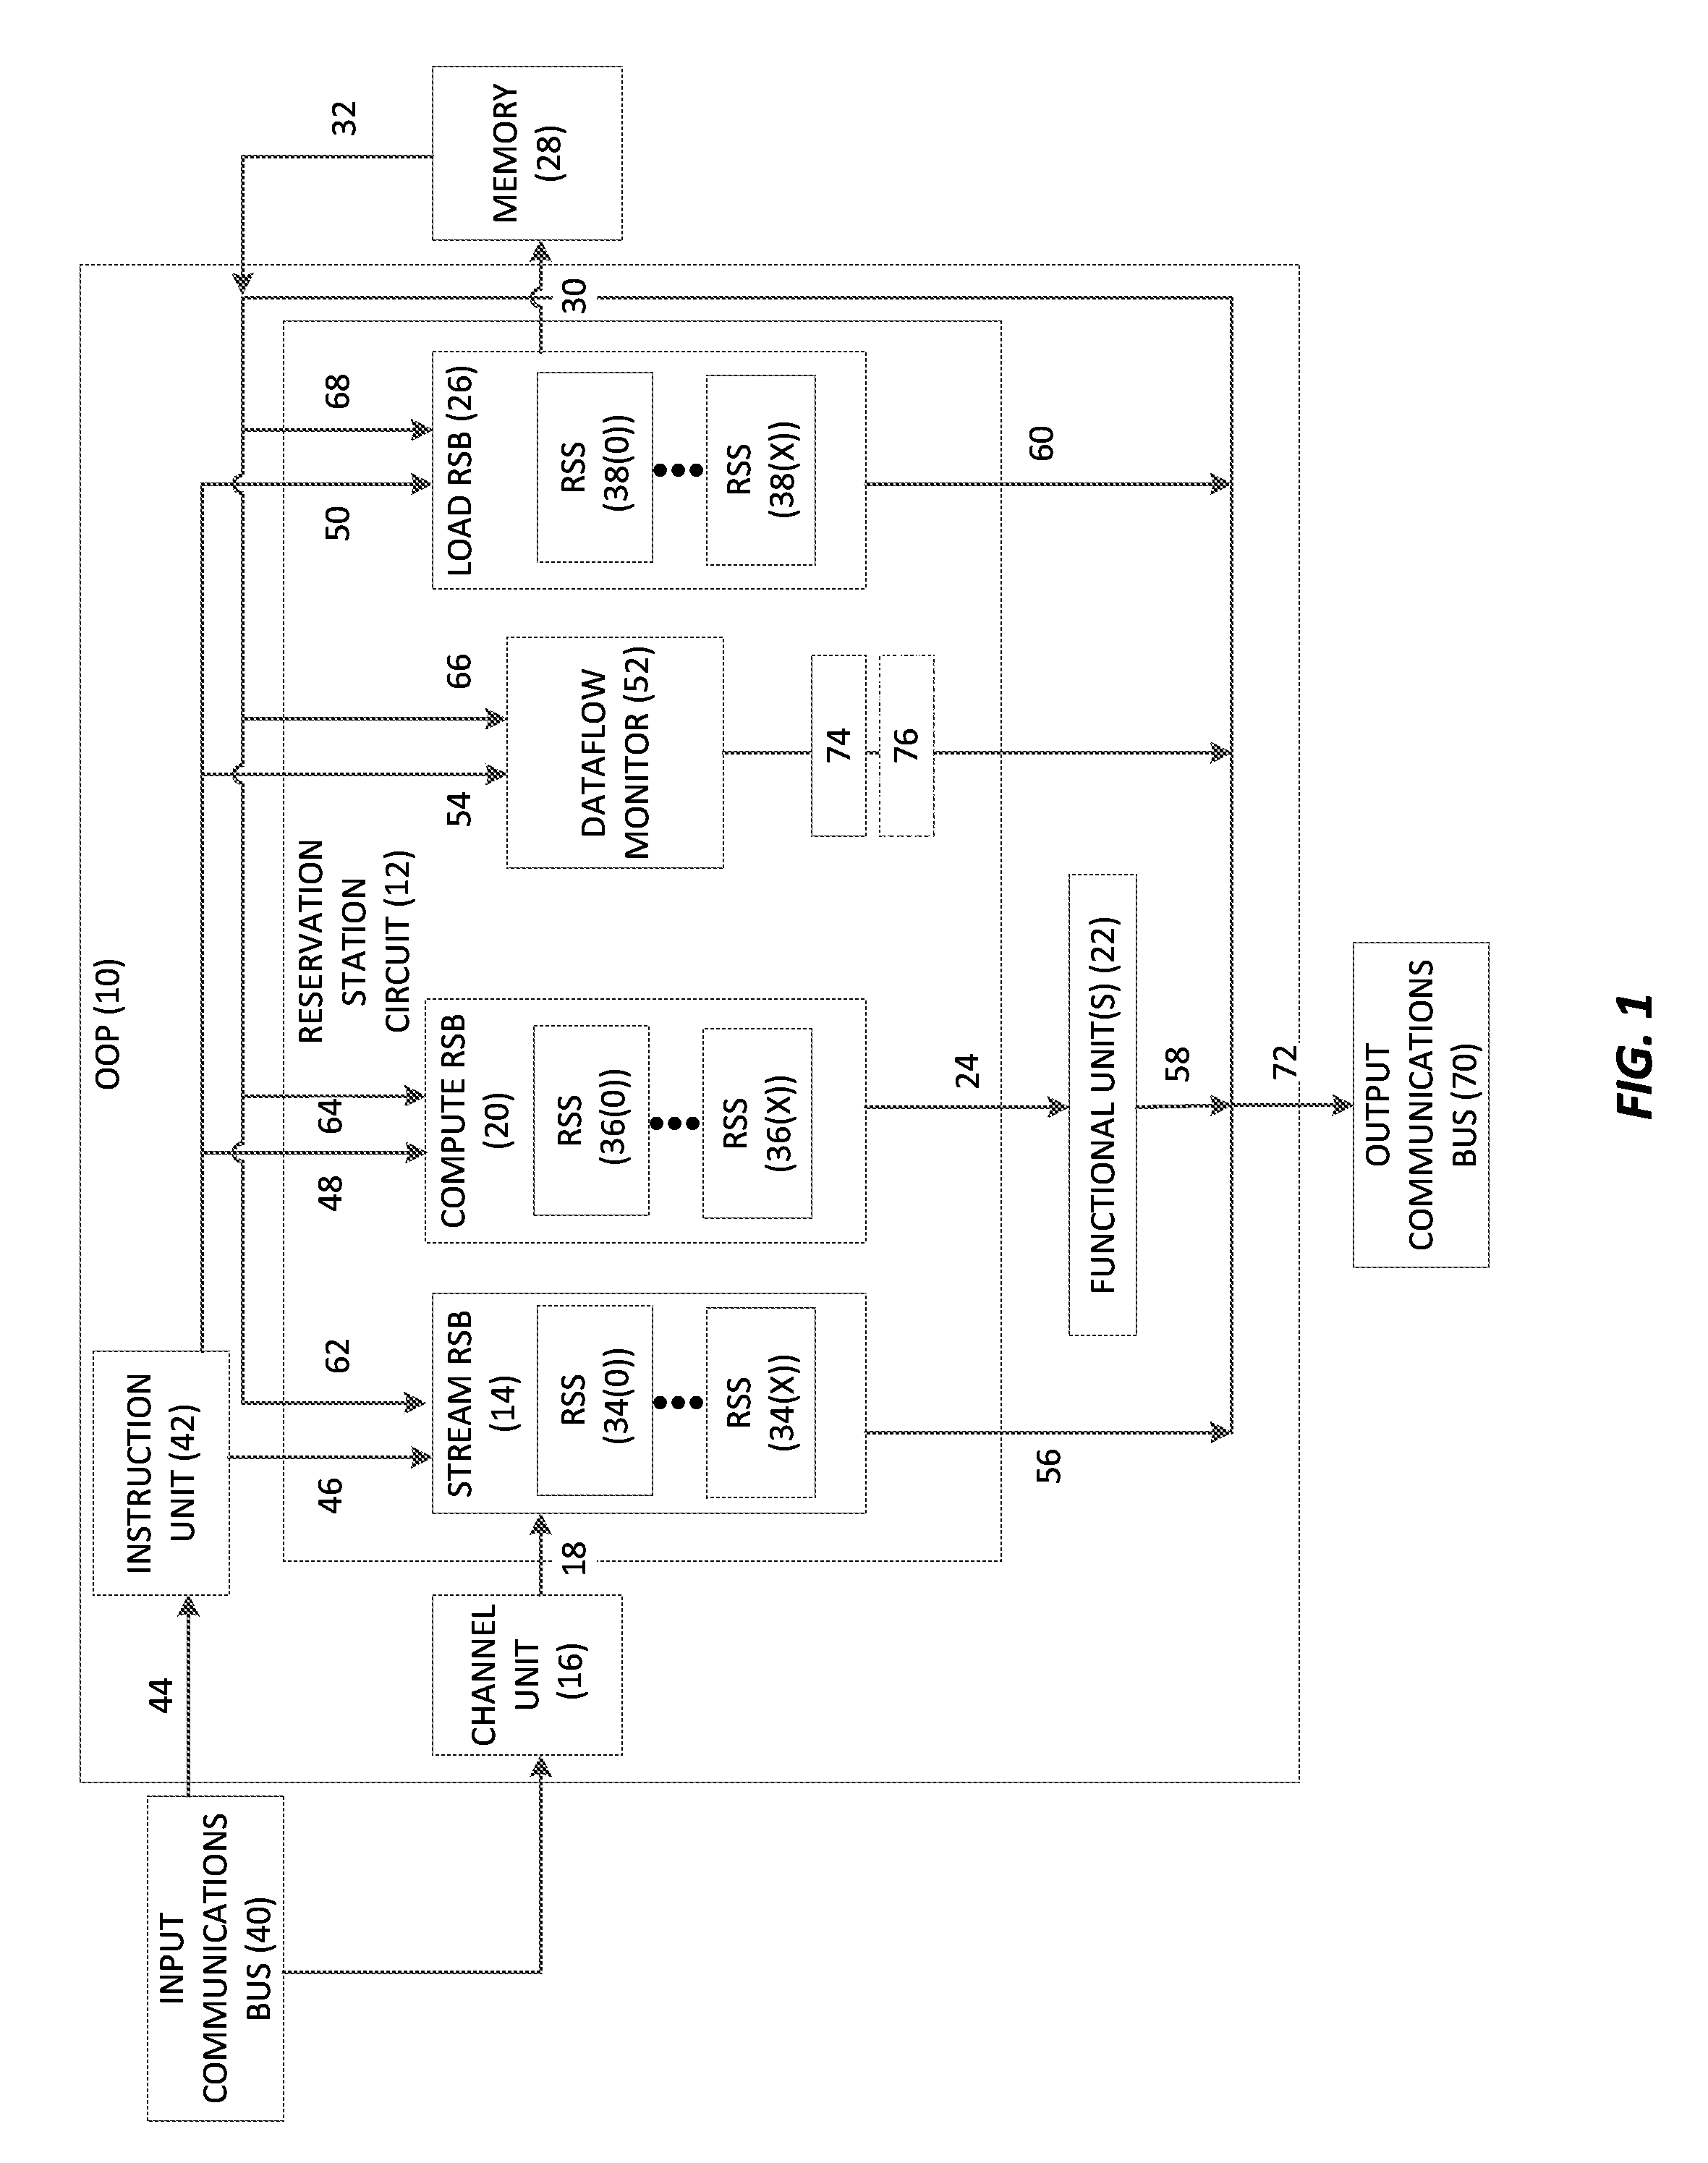 MANAGING DATAFLOW EXECUTION OF LOOP INSTRUCTIONS BY OUT-OF-ORDER PROCESSORS (OOPs), AND RELATED CIRCUITS, METHODS, AND COMPUTER-READABLE MEDIA